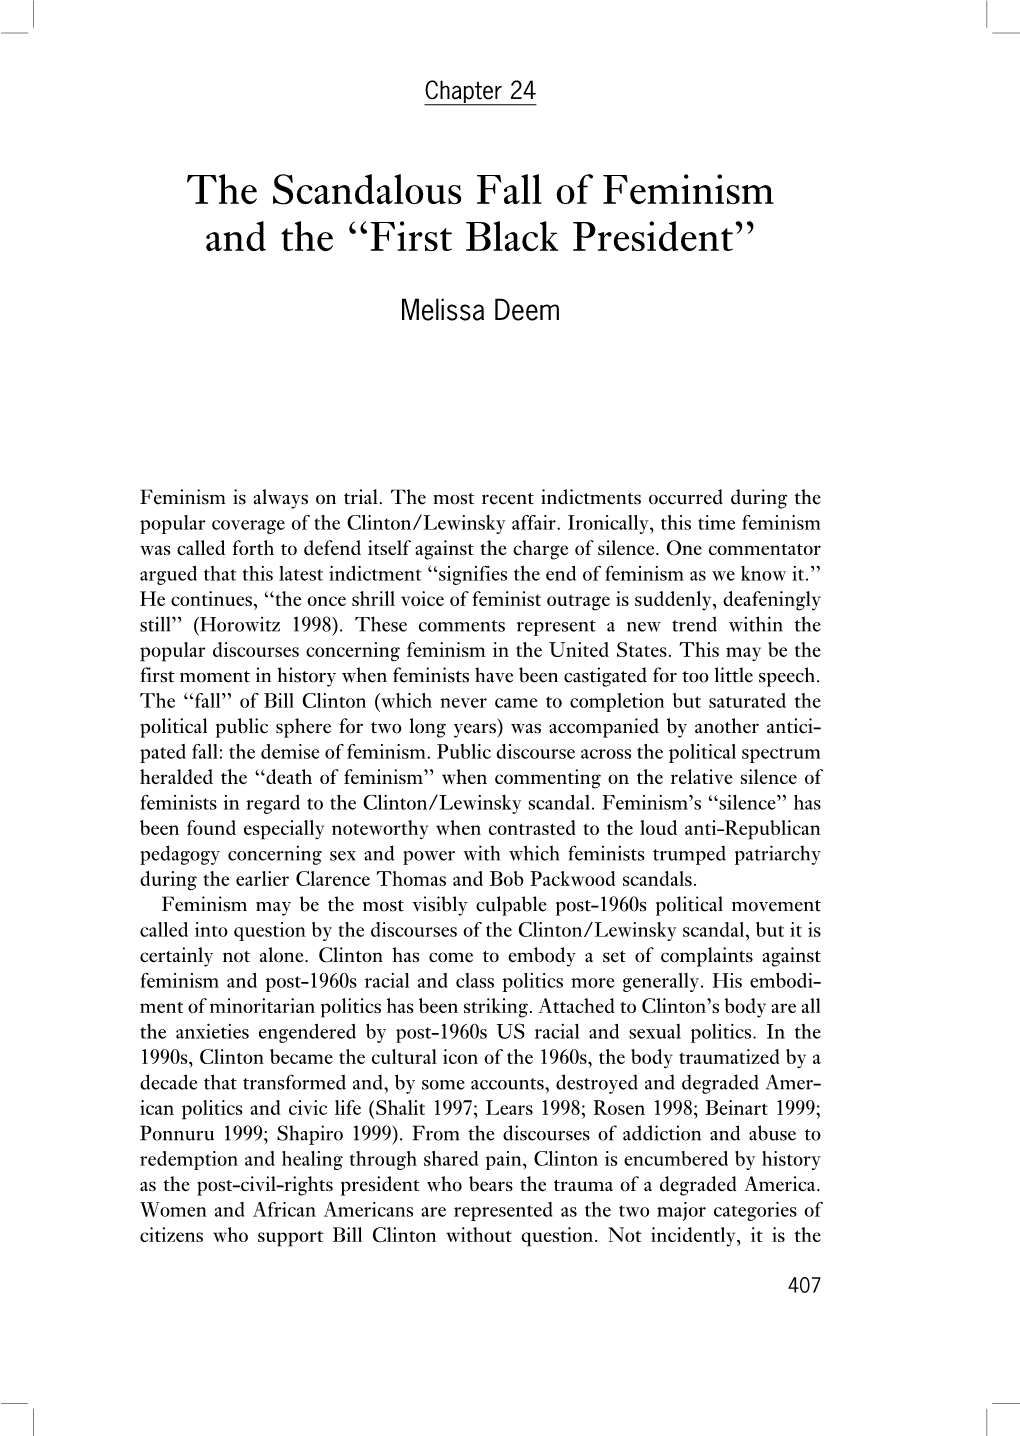 The Scandalous Fall of Feminism and the ``First Black President''